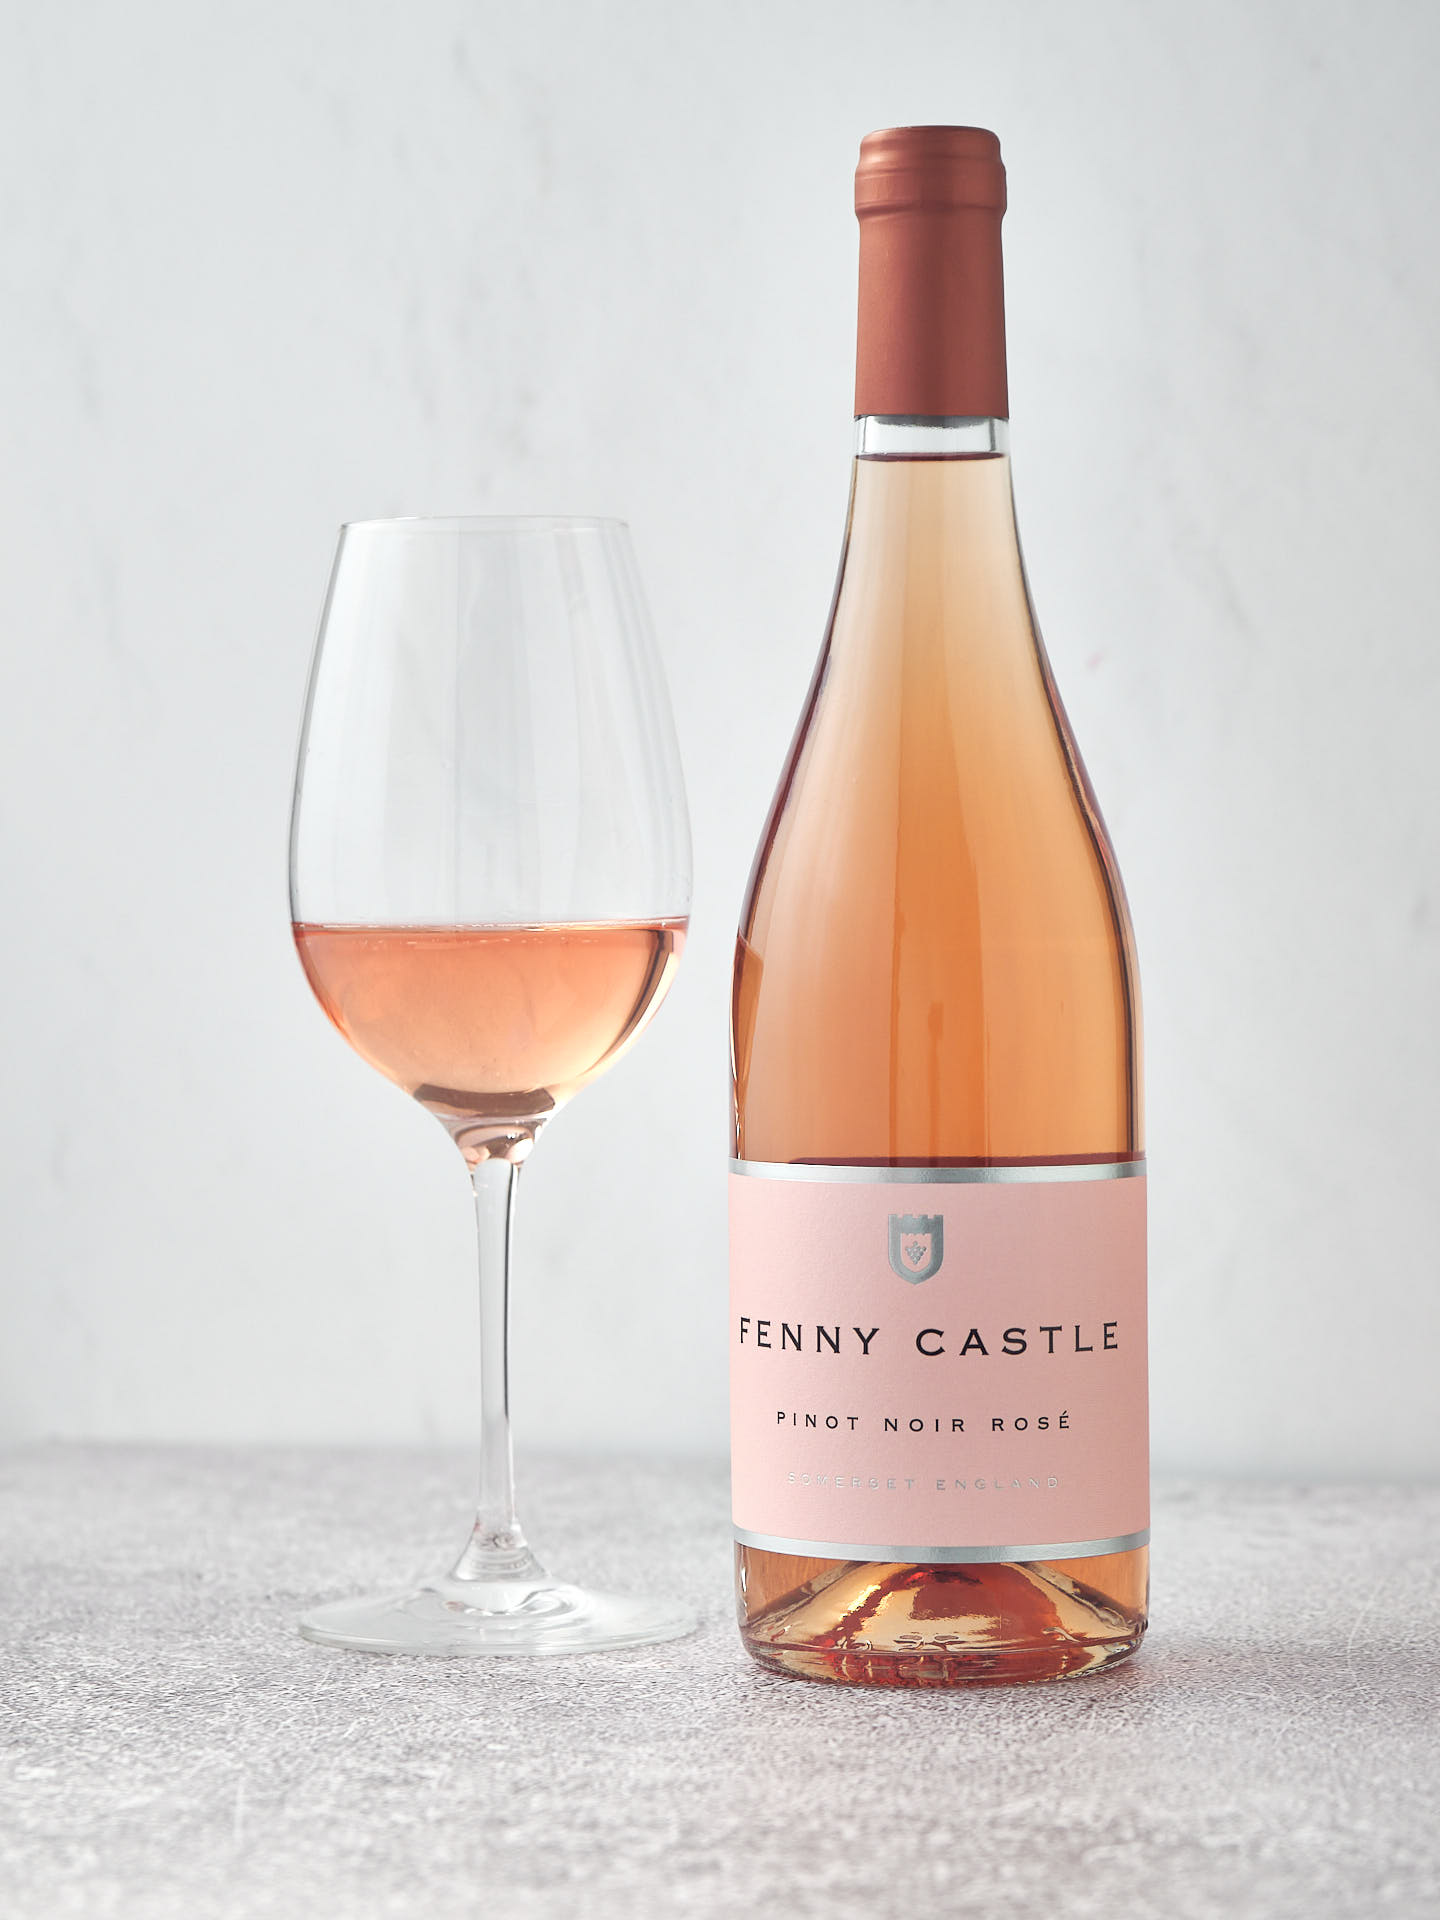 A bottle of Pinot Noir Rosé wine from an English vineyard in Somerset.